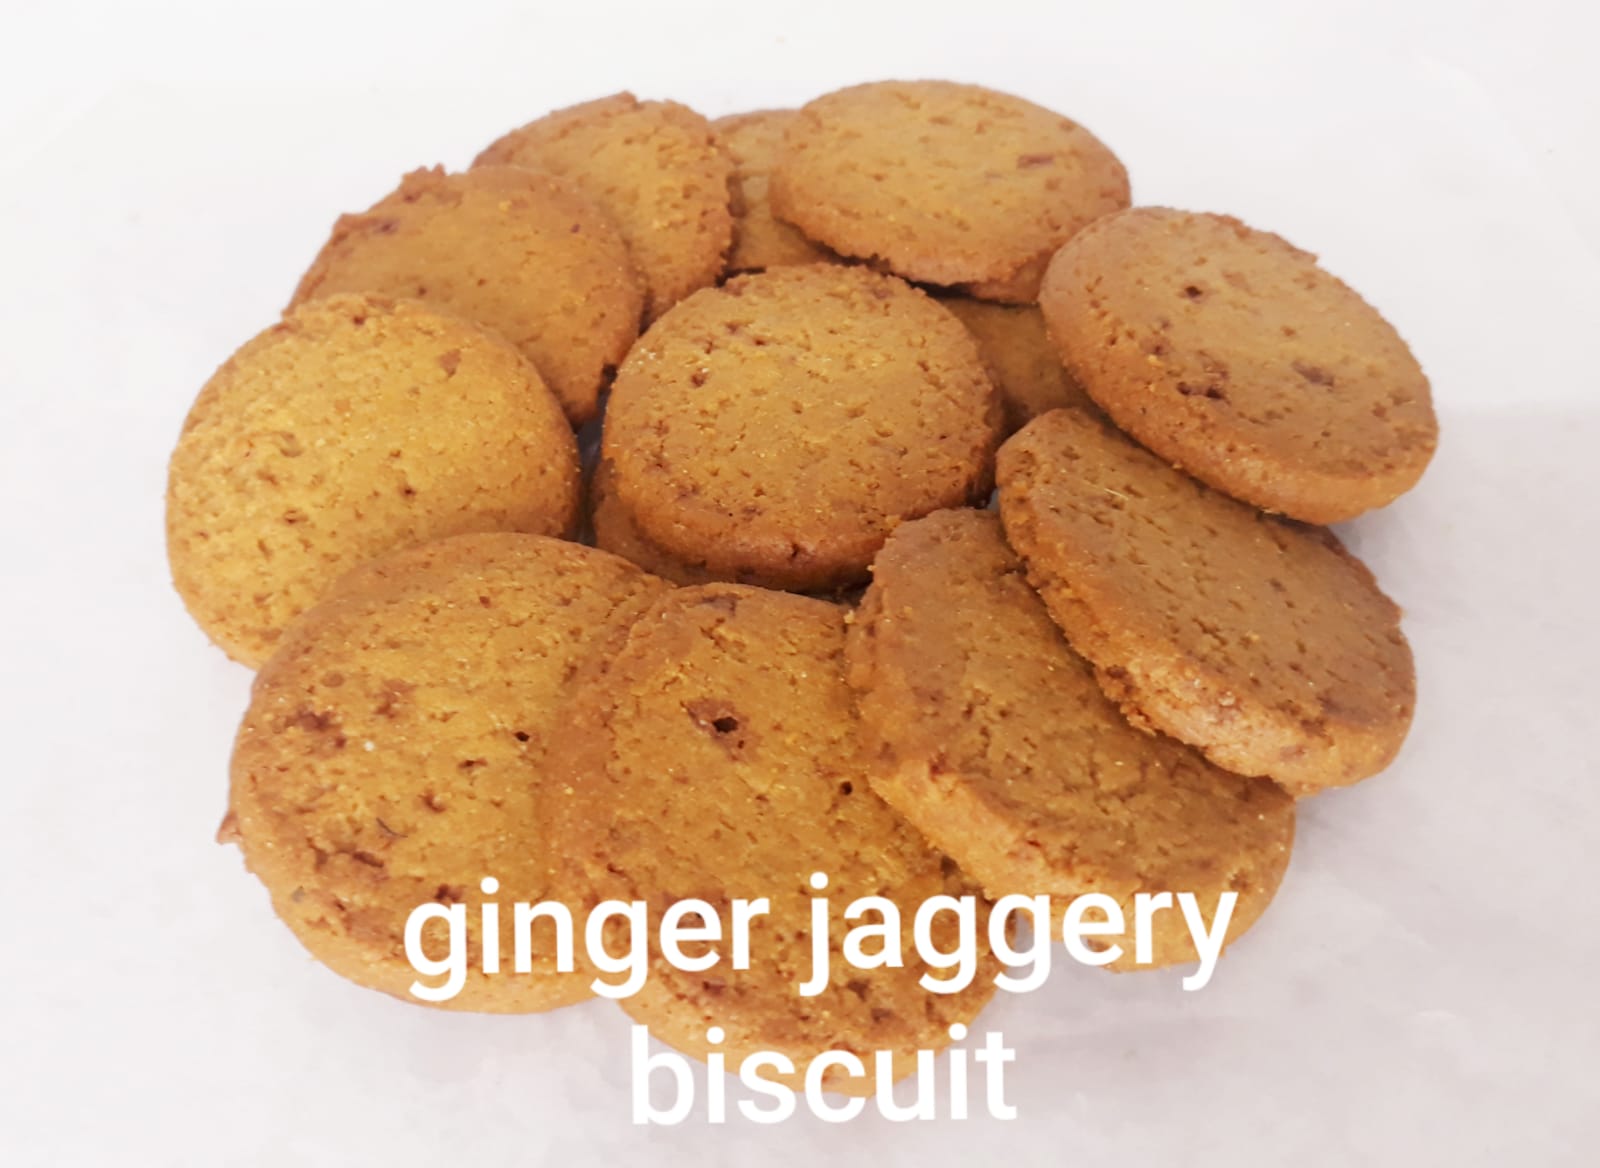 Ginger Jaggery biscuits